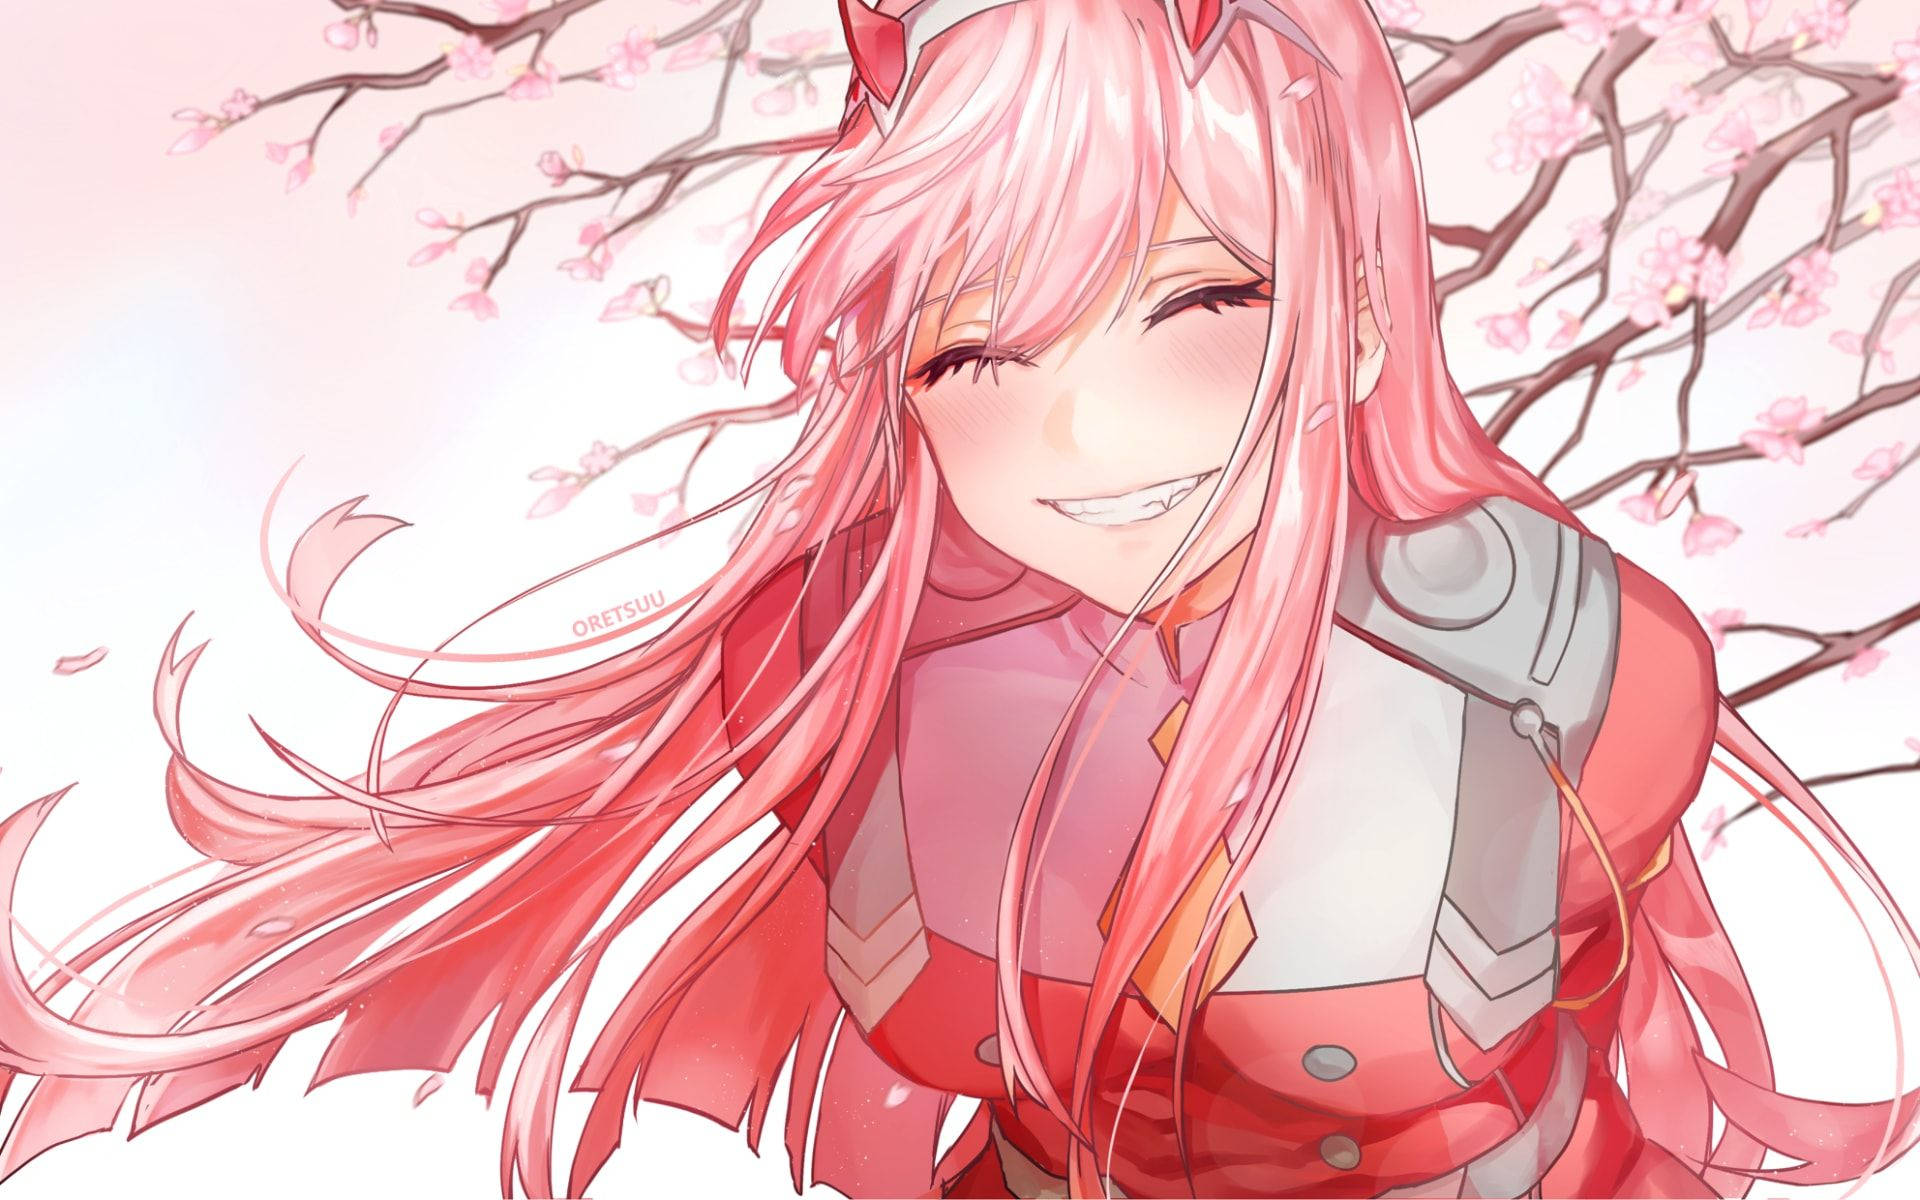 Celebrating Love with Beauty: Zero Two and the Cherry Blossoms Wallpaper